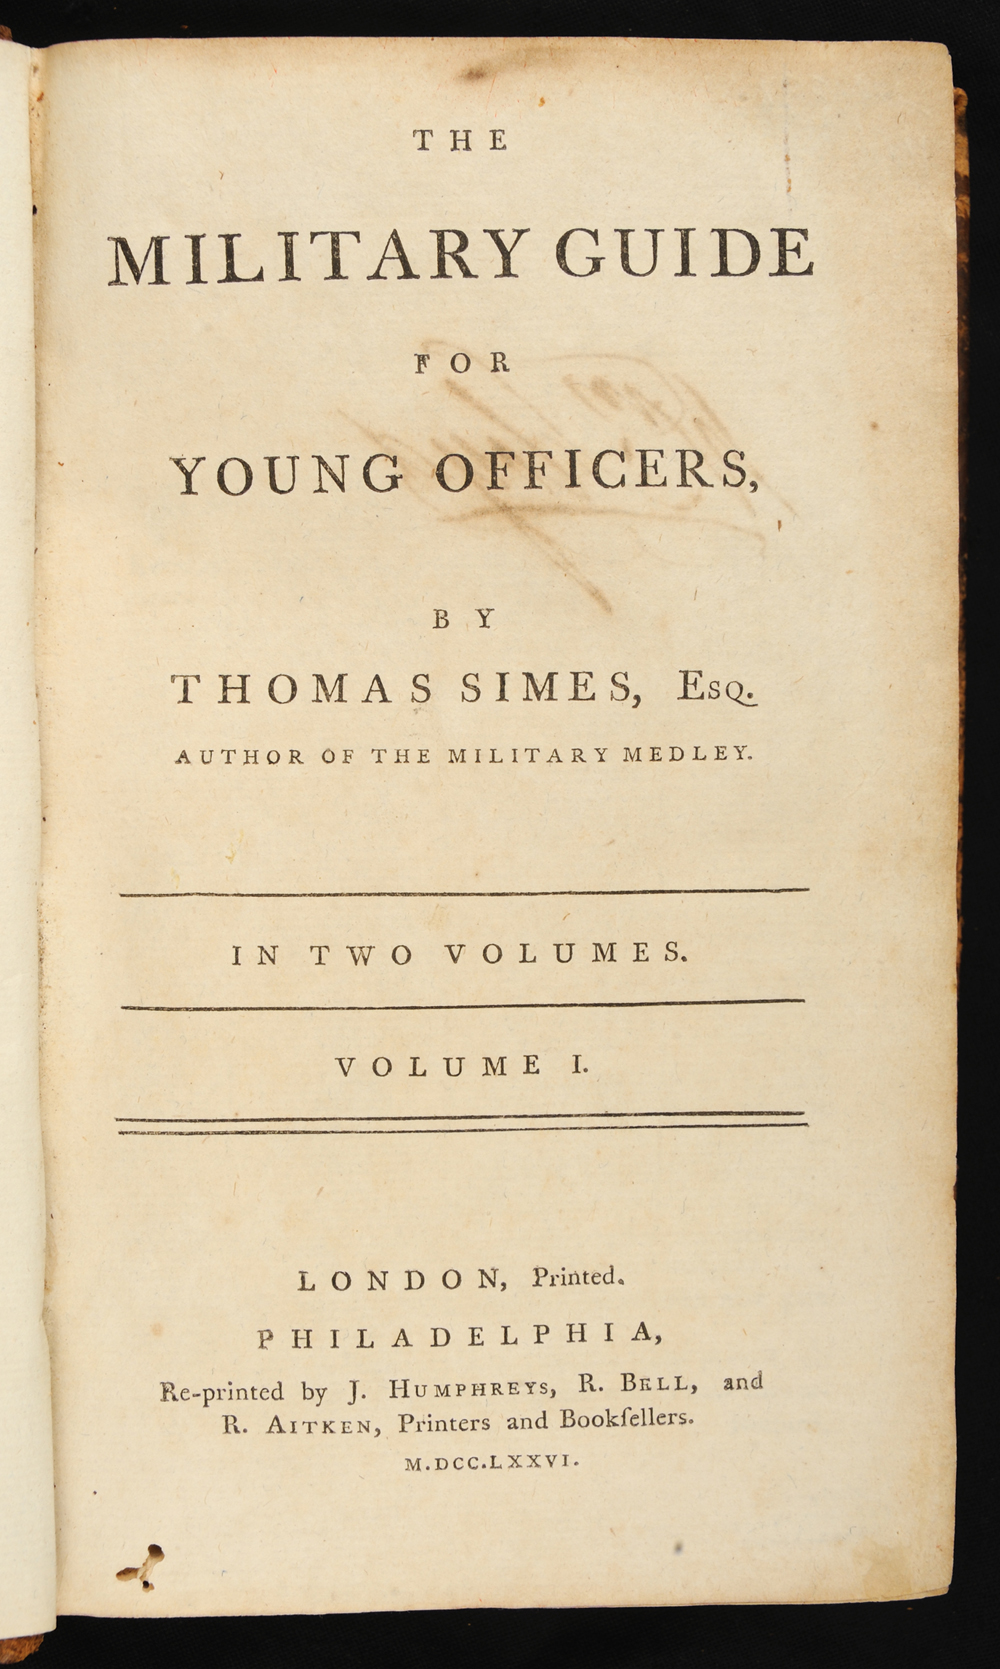 <em>The Military Guide for Young Officers</em> by Thomas Simes, 1776